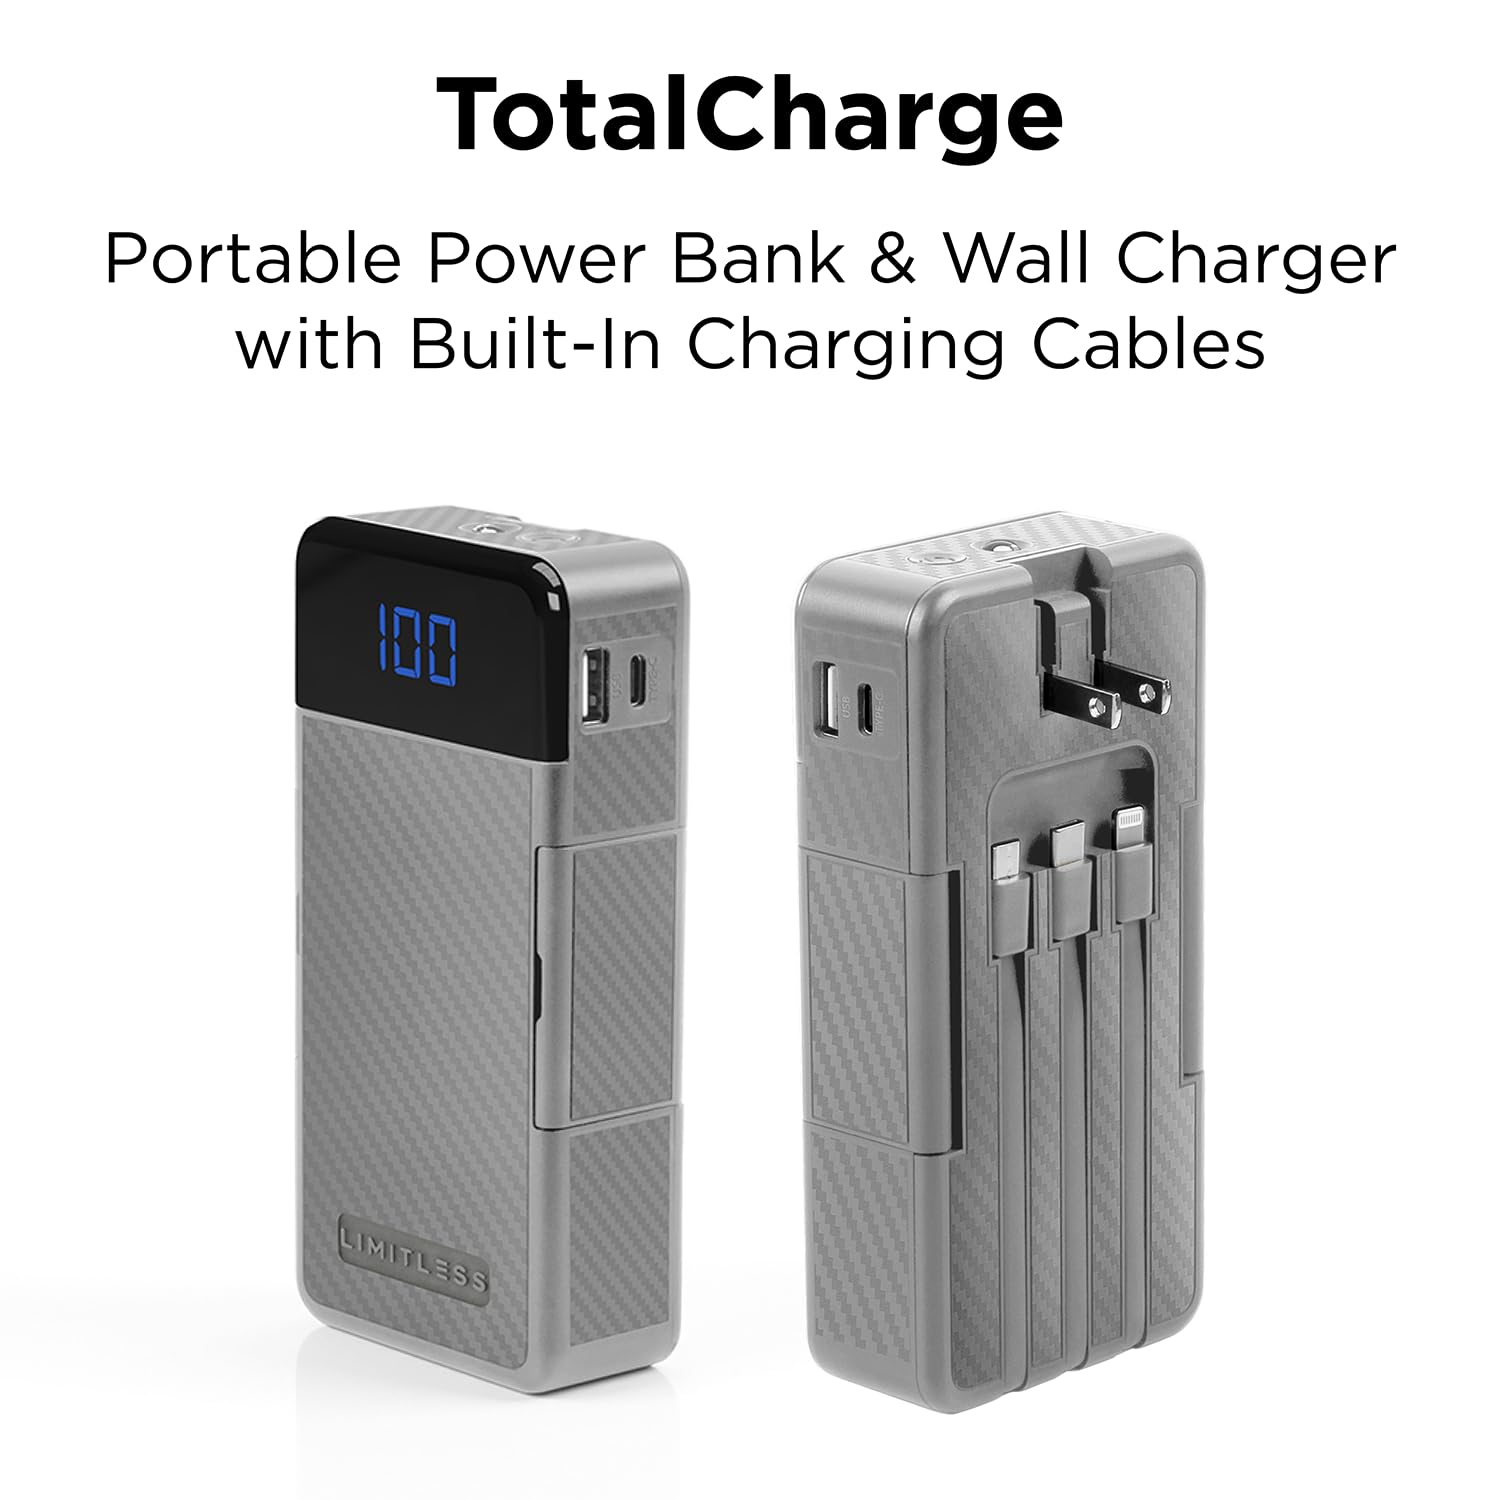 Limitless TotalCharge Portable Power Bank & Wall Charger with Built-in Charging Cables (Gray)